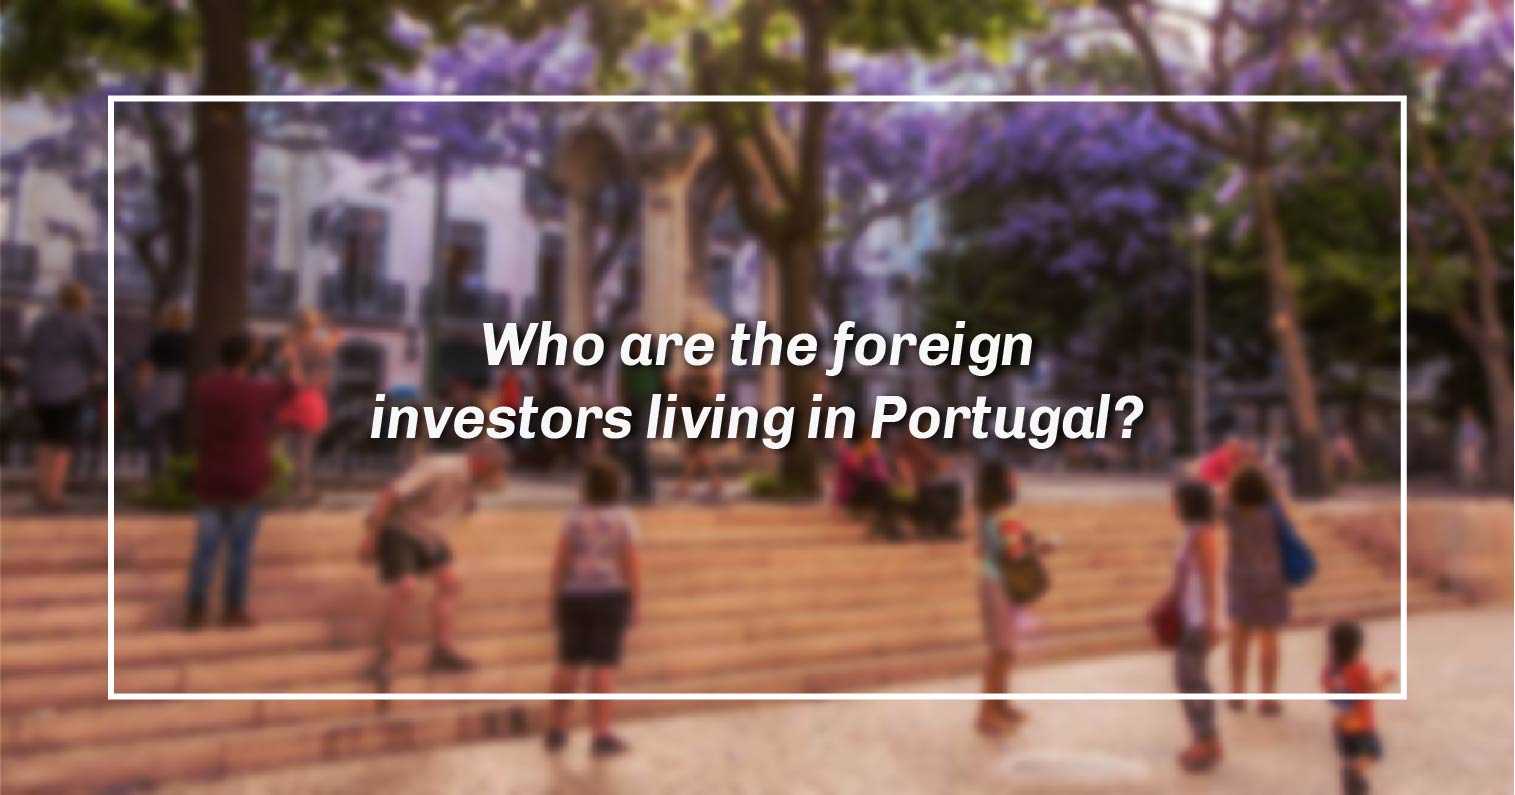 Who are the foreign investors living in Portugal?